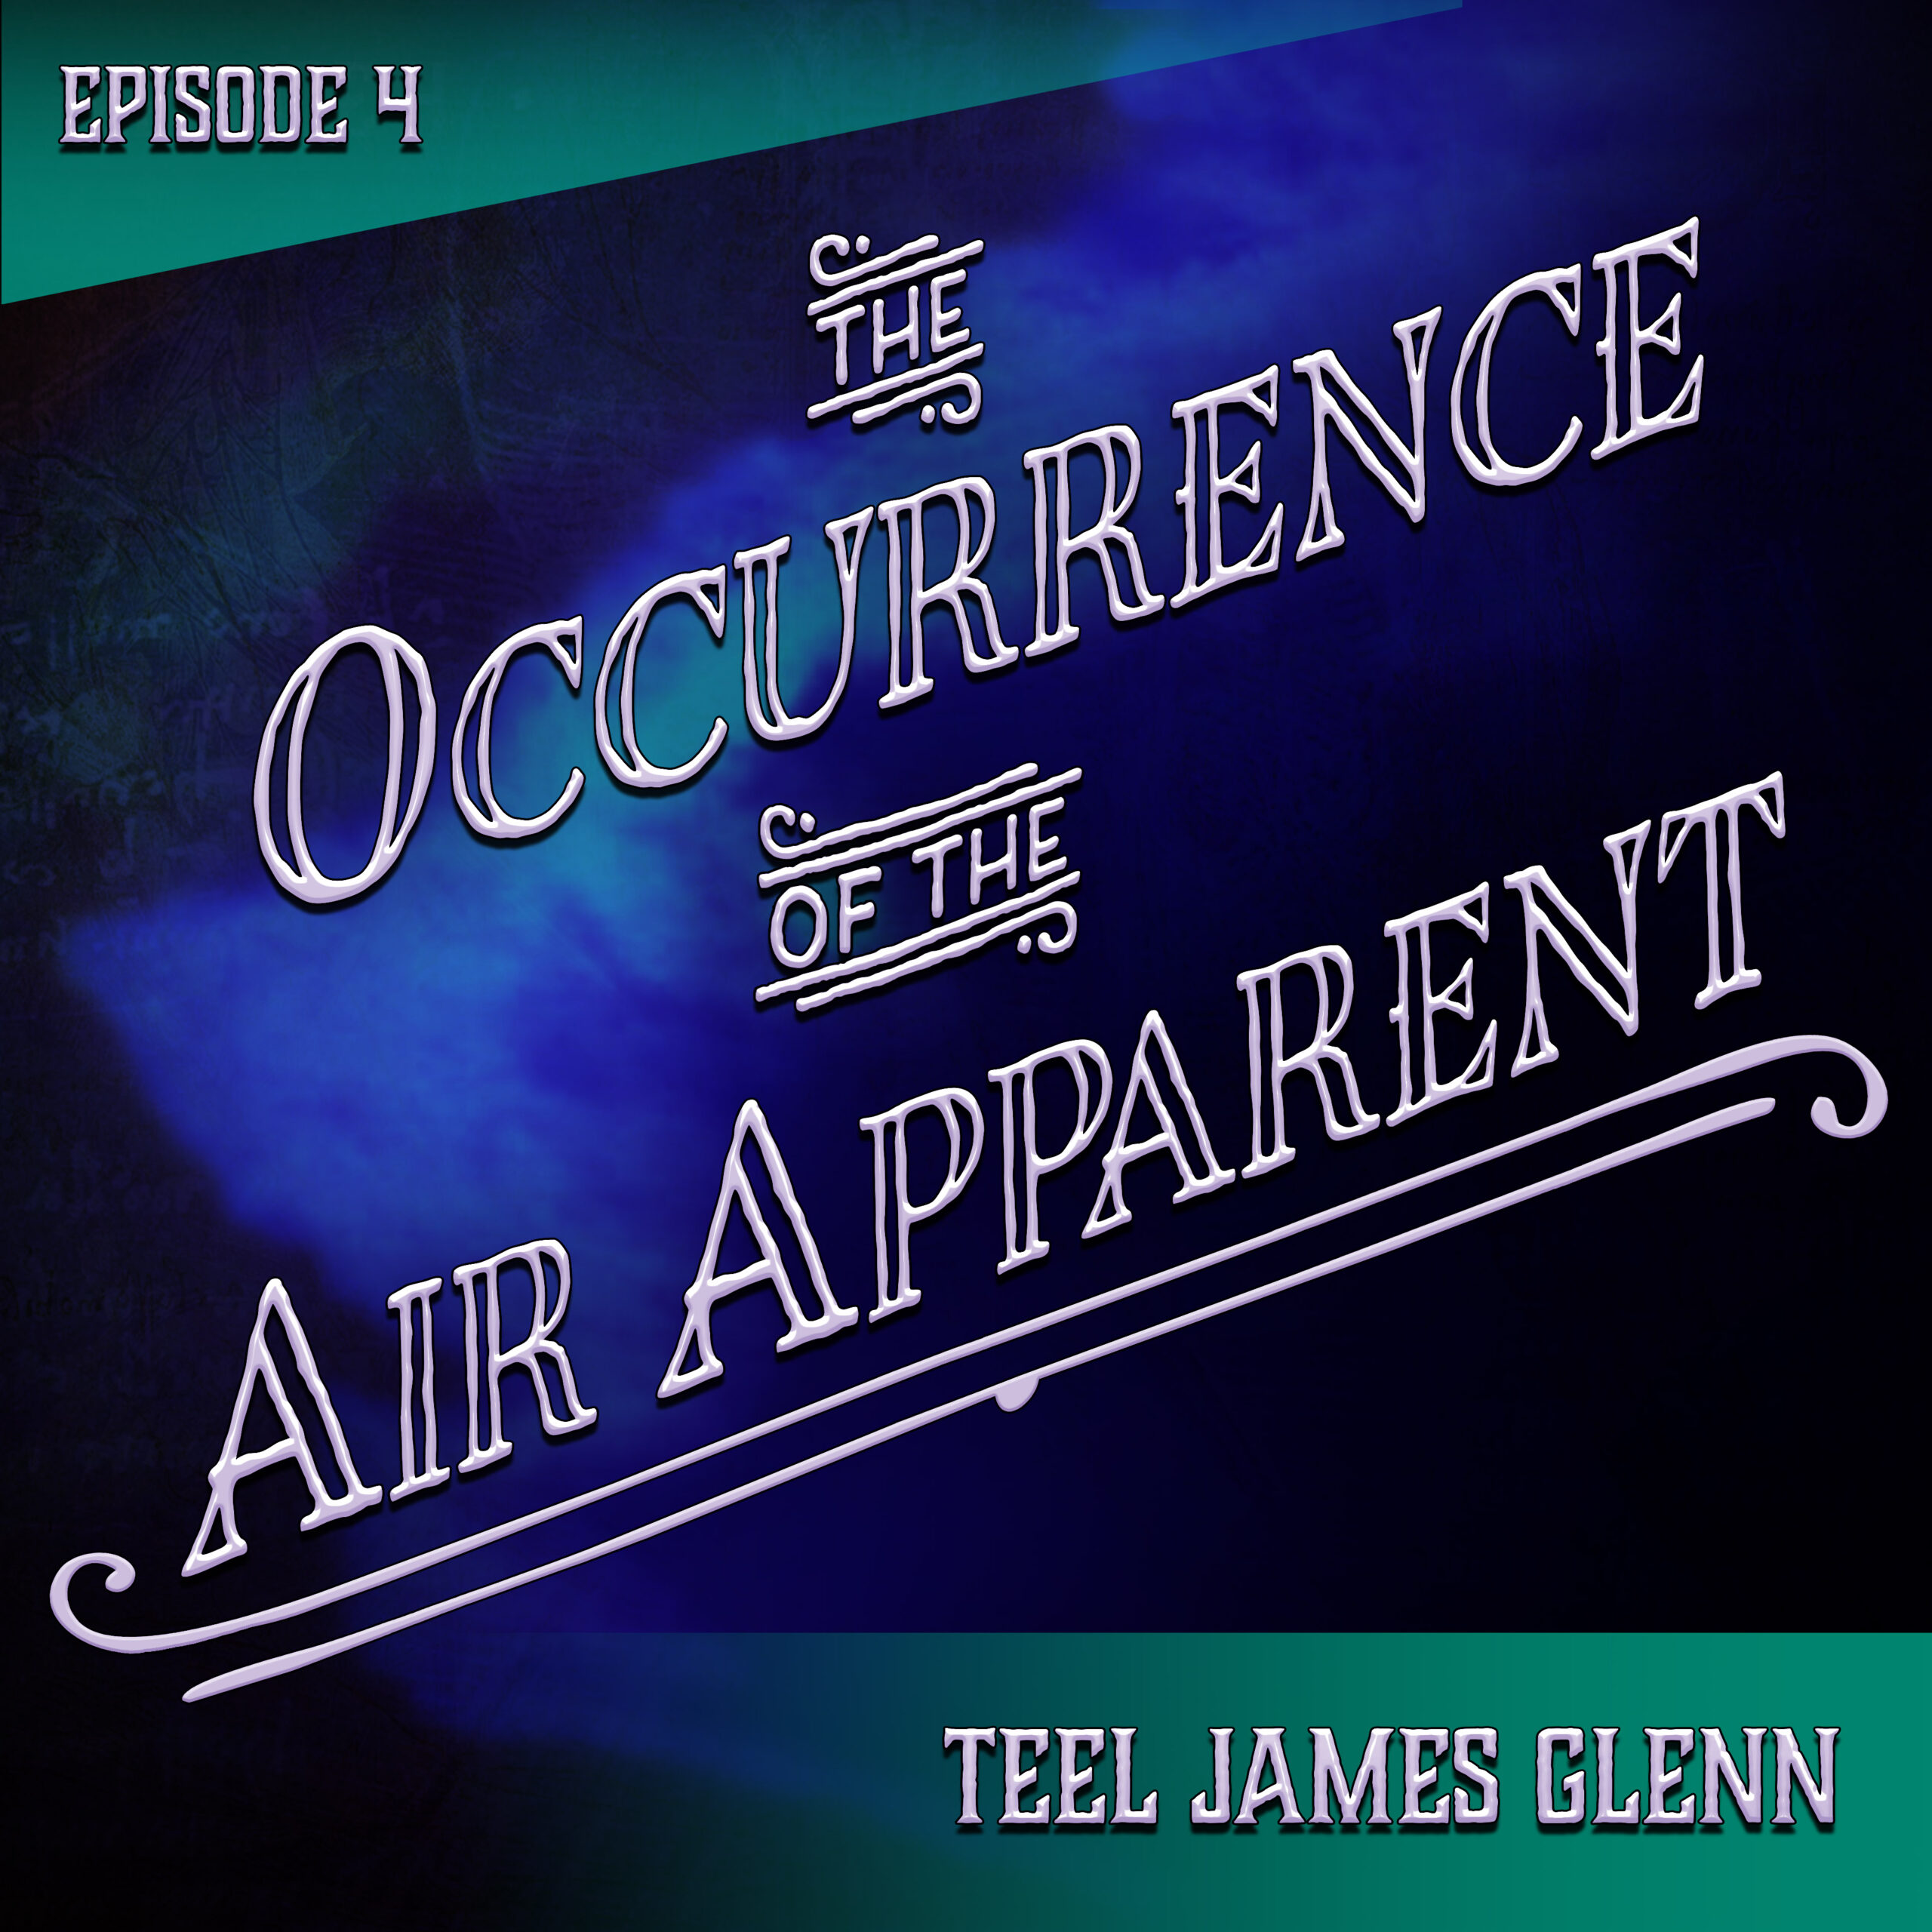 Episode #4: The Occurrence of the Air Apparent